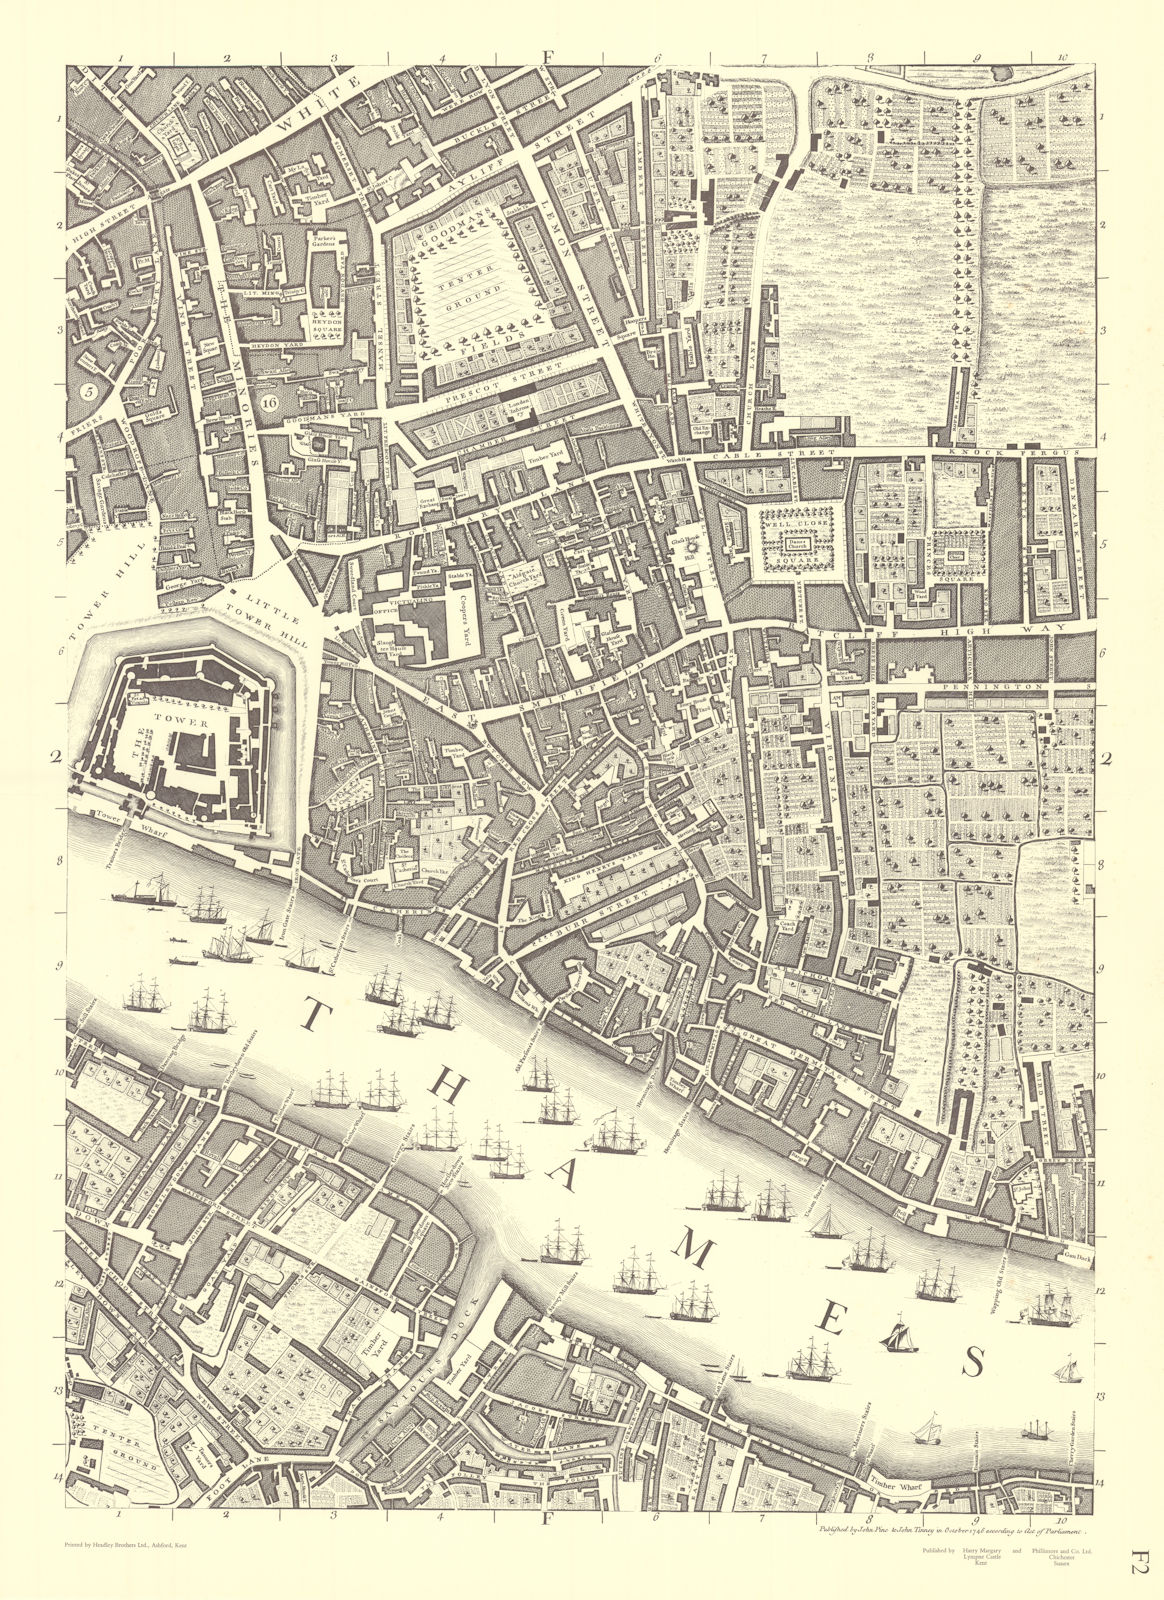 Tower Aldgate Wapping Whitechapel Bermondsey. F2. After ROCQUE 1971 (1746) map